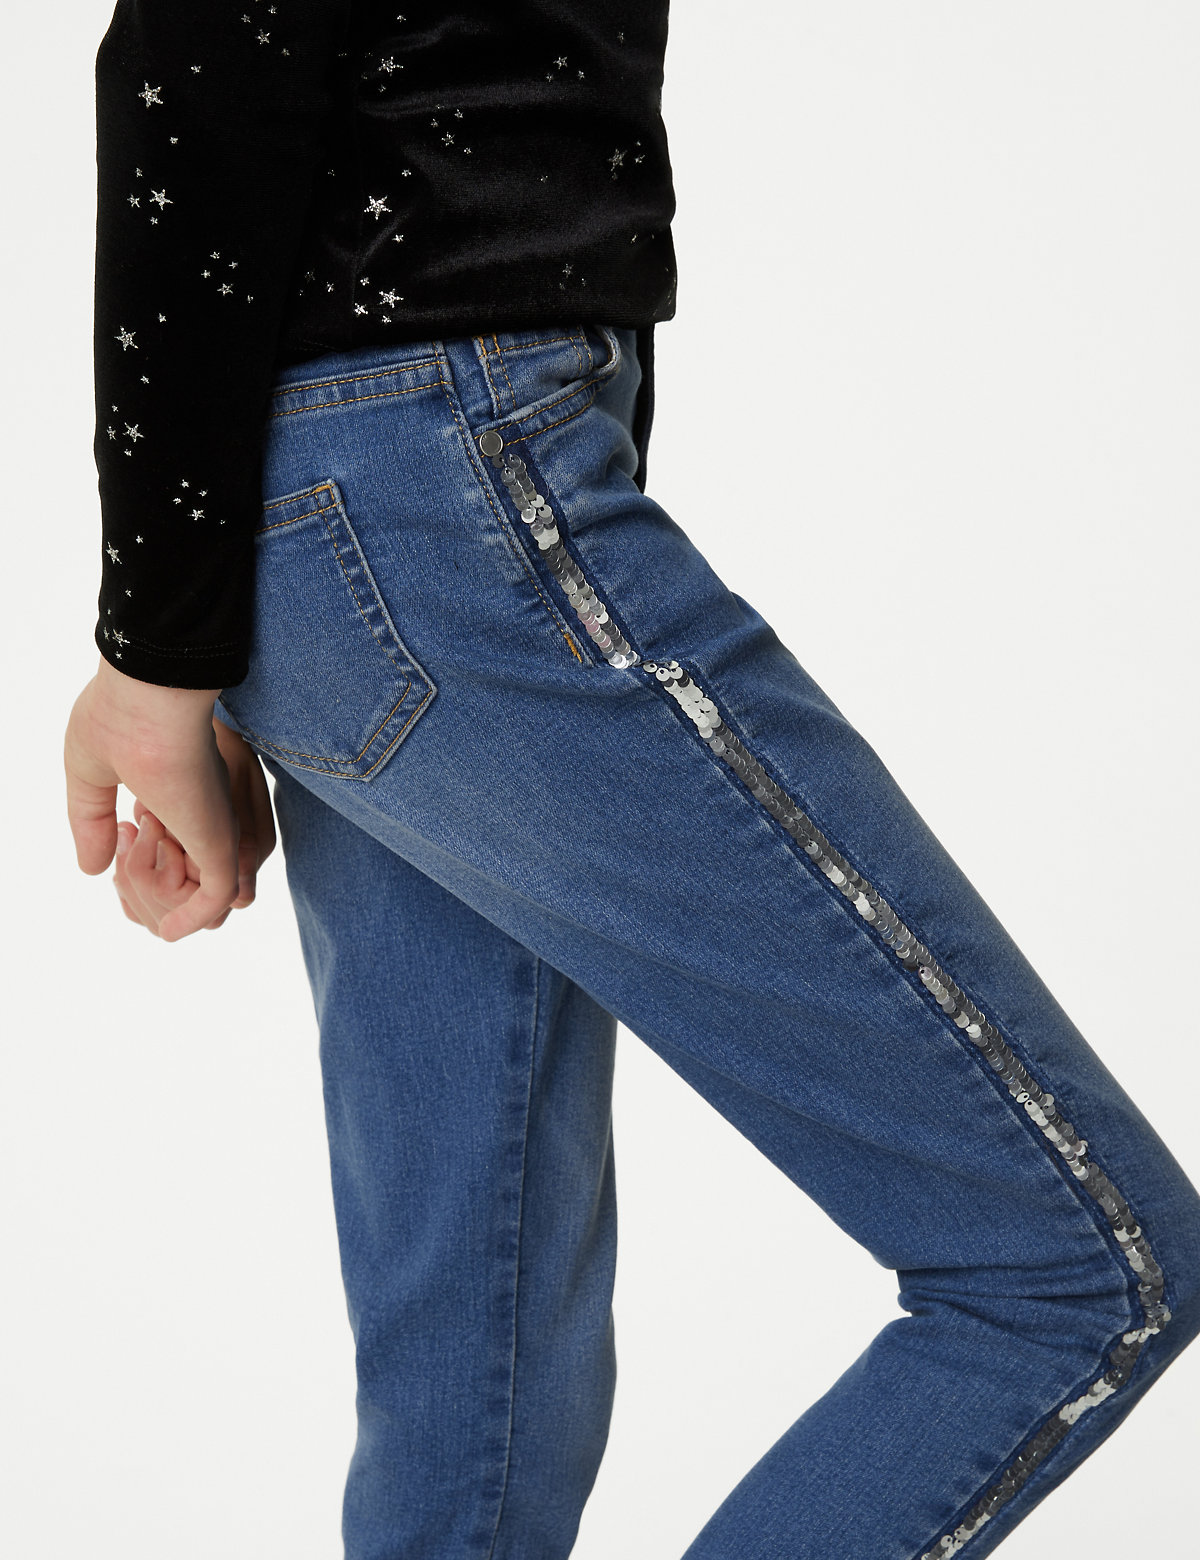 Skinny Cotton Rich Sequin Jeans (6-16 Yrs)